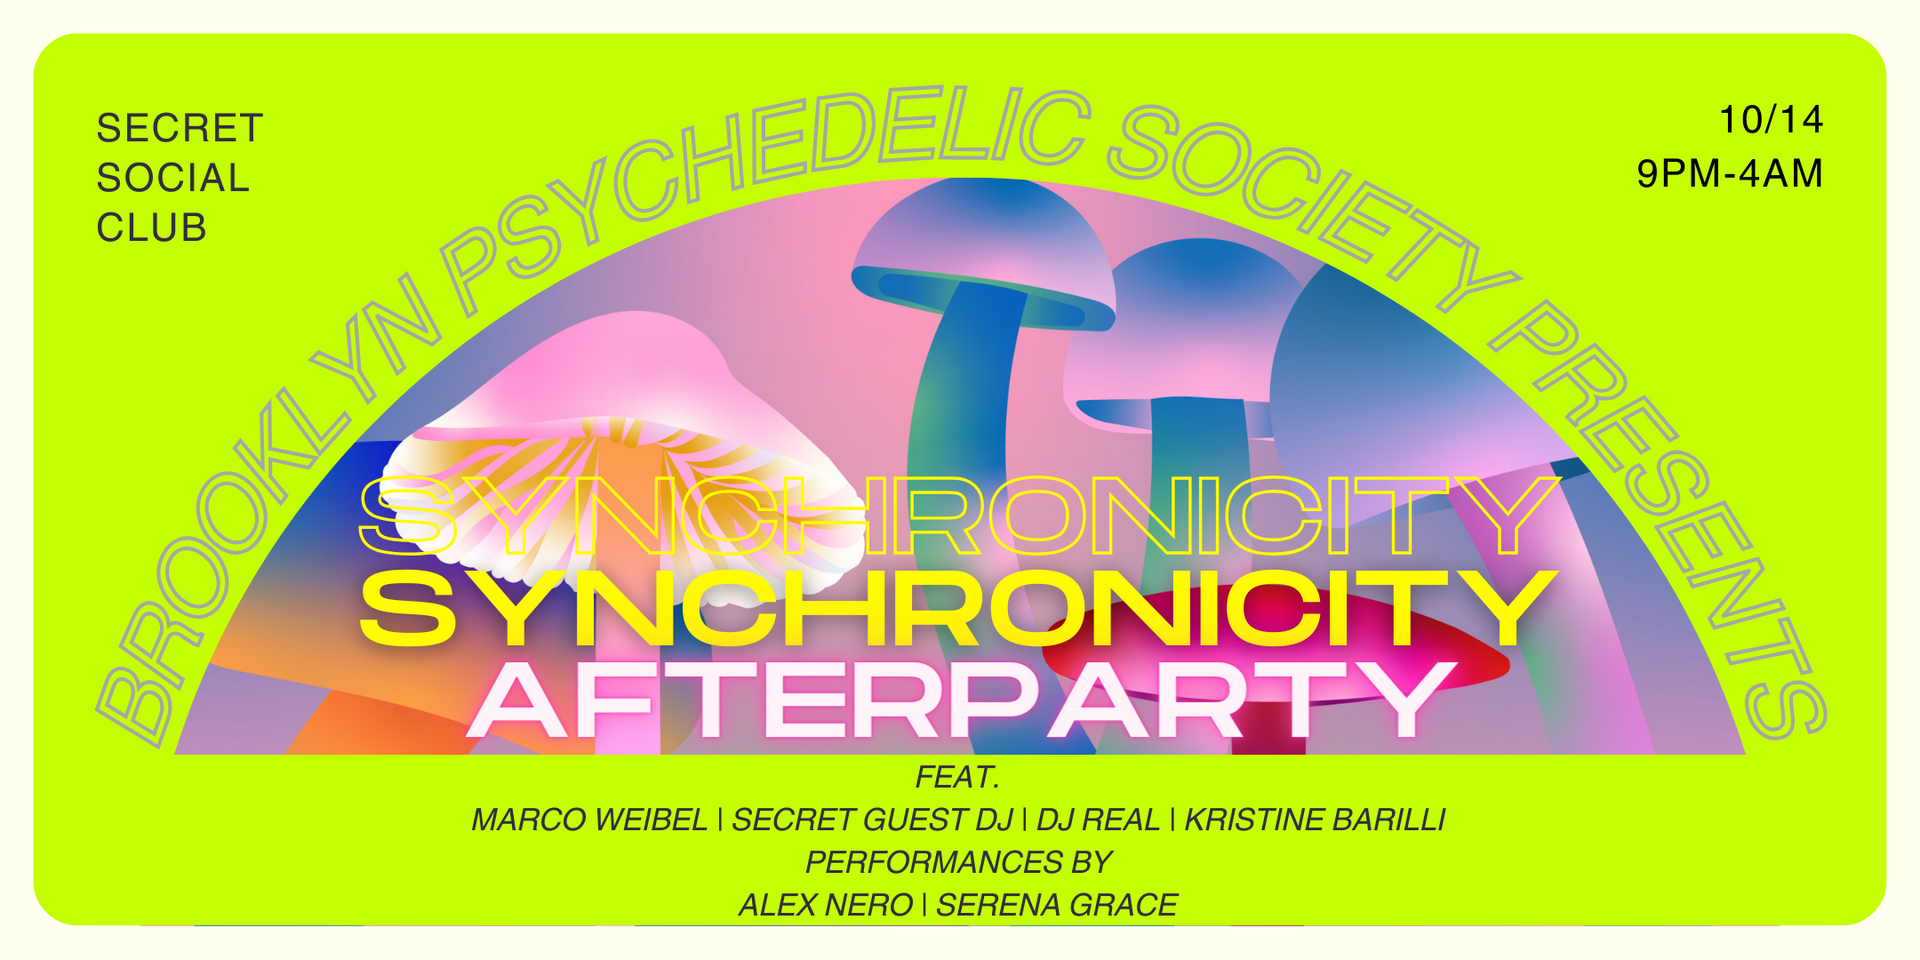 A neon yellow ticket for a concert called synchronicity afterparty.